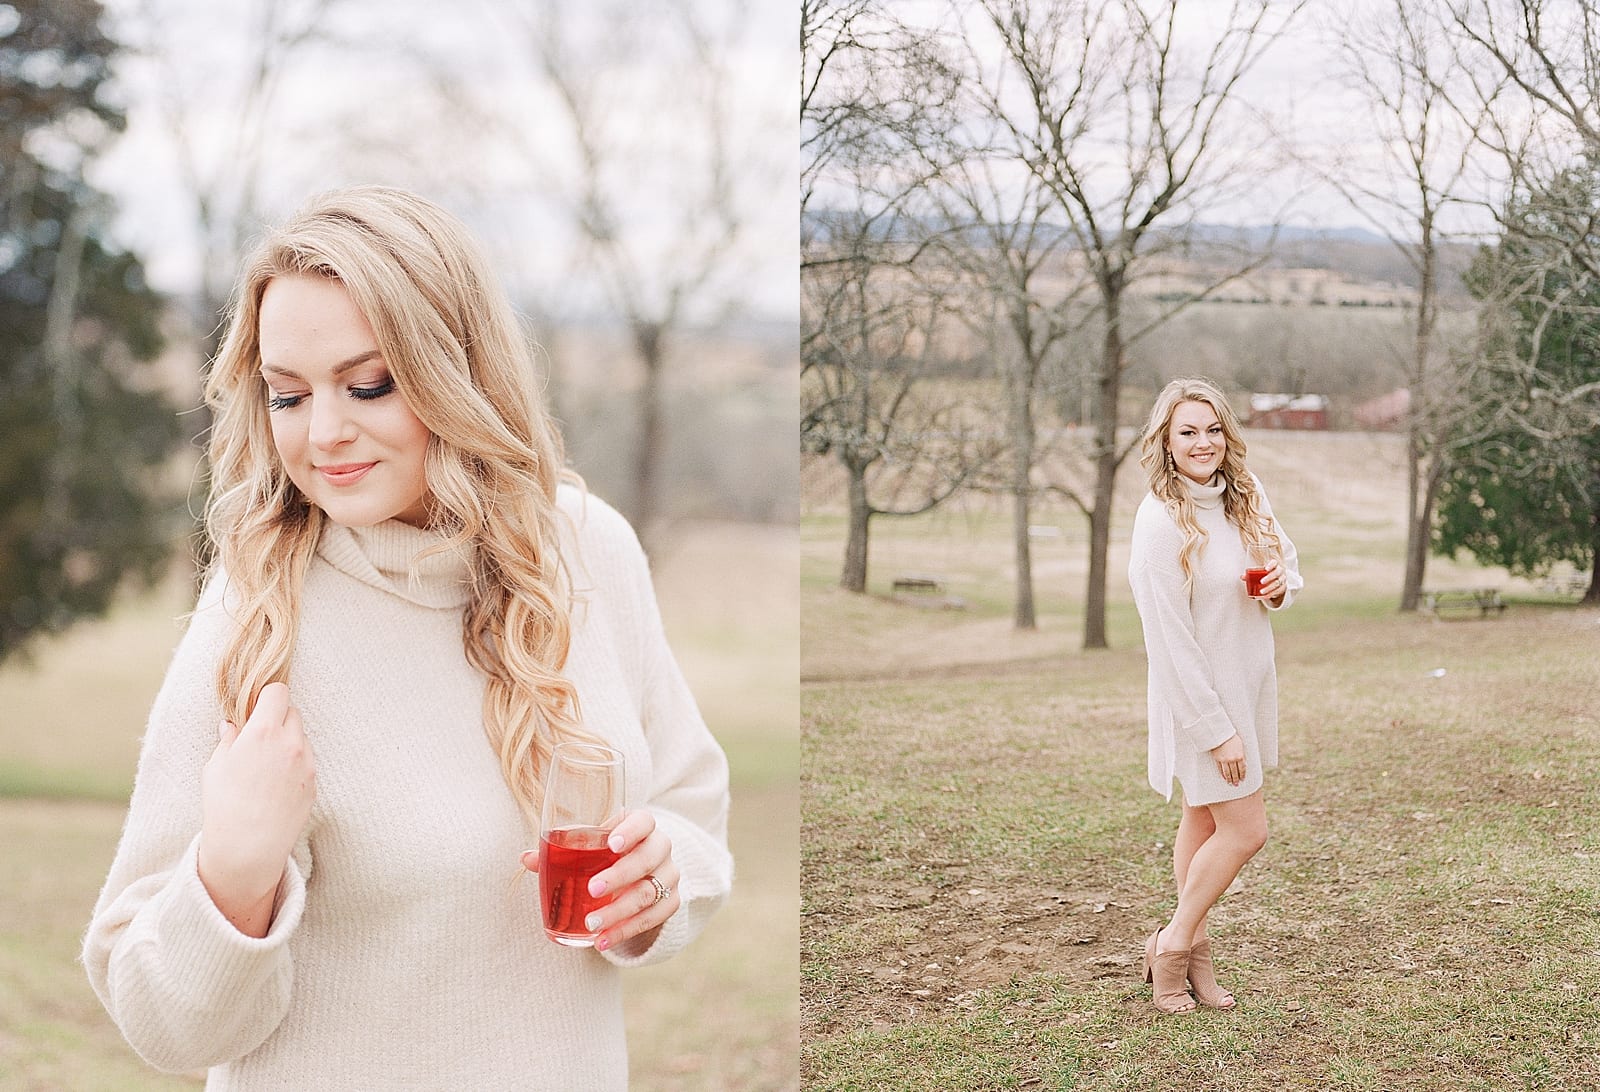 Bride to be at winery during bachelorette weekend photos